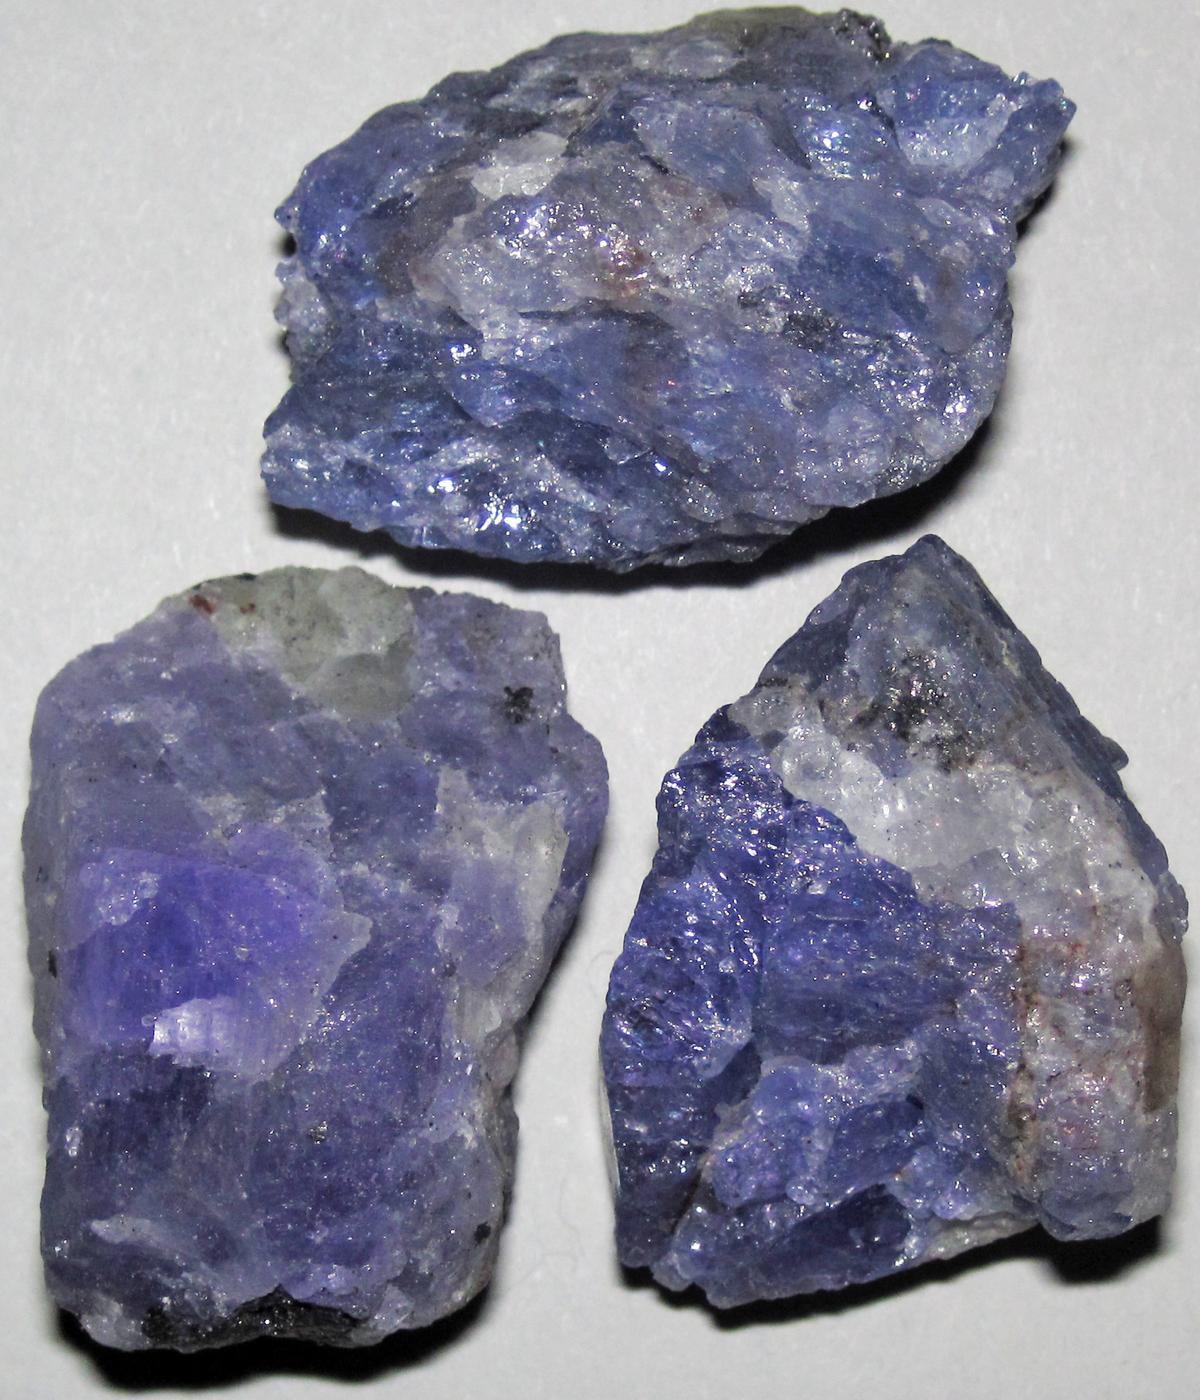 Tanzanite, dull brown when extracted from mines, turns violet-blue when heated; gems pictured on Jan. 13, 2020 (<a href="https://commons.wikimedia.org/wiki/File:Tanzanite_(Merelani_Tanzanite_Deposit,_Merelani_Hills,_Arusha,_Tanzania).JPG">James St. John</a>/CC BY 2.0)